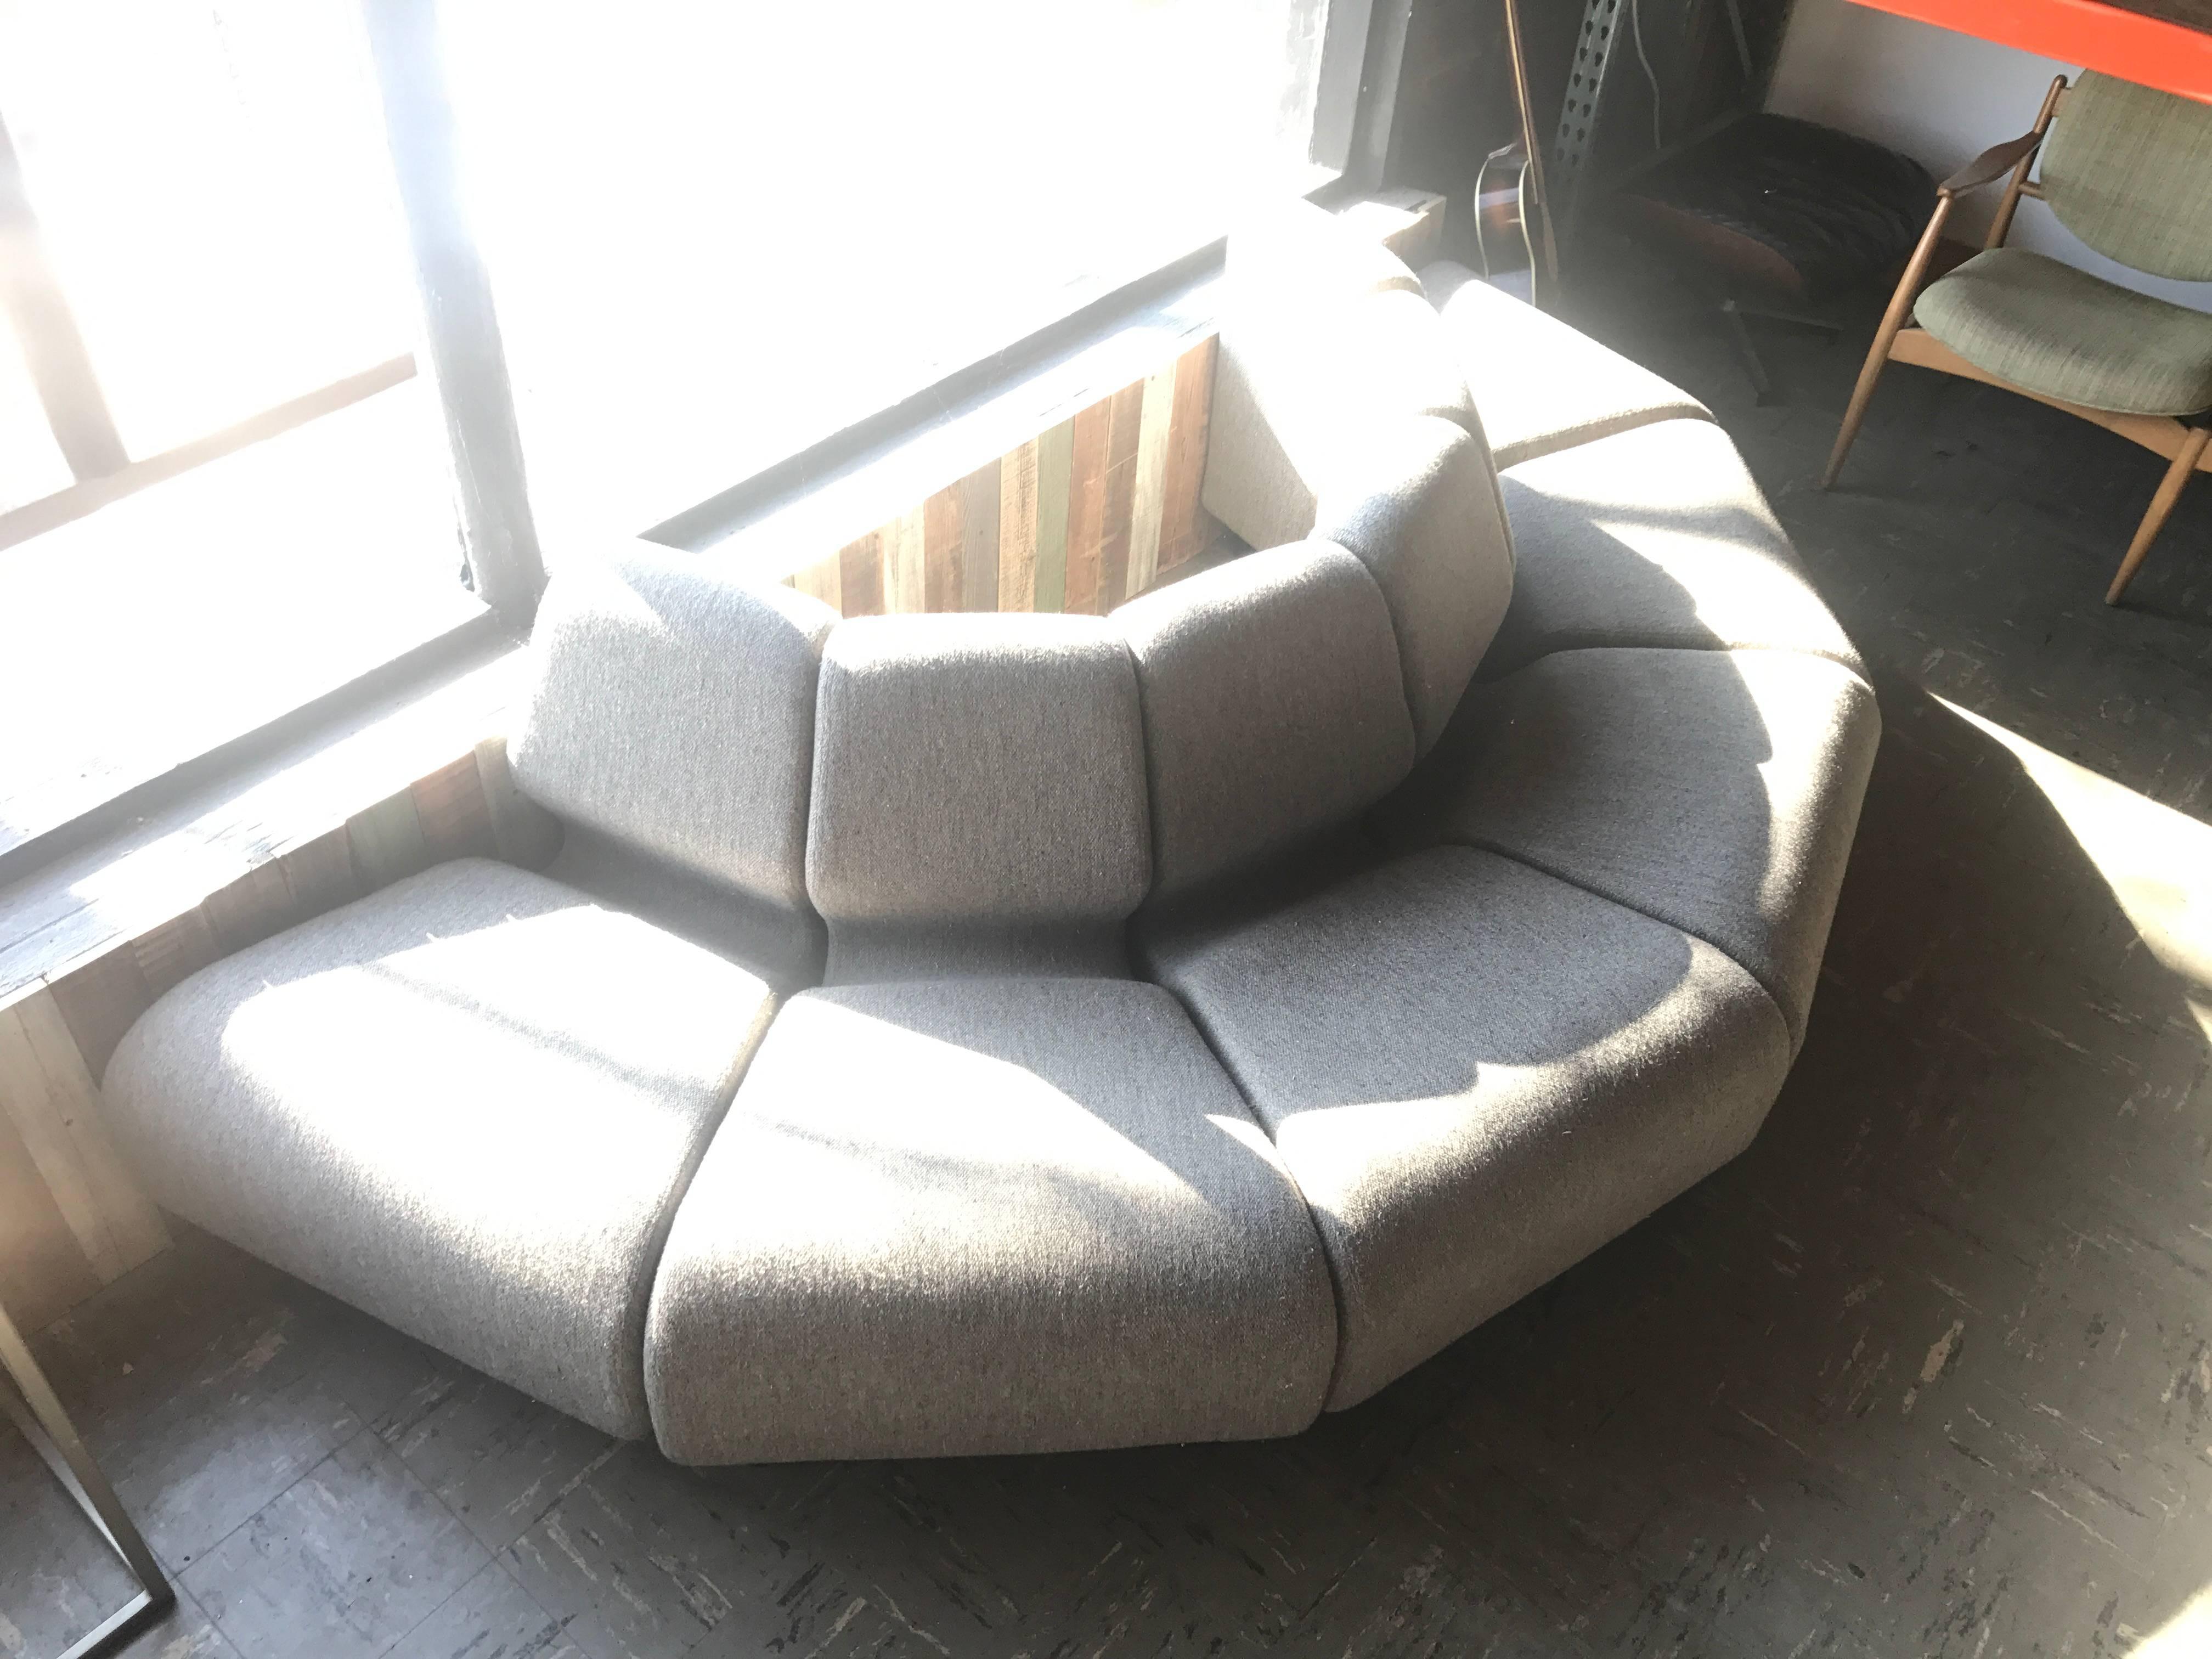 Six-piece sectional
creates an inverted half circle
great for a game room office or a business.
 